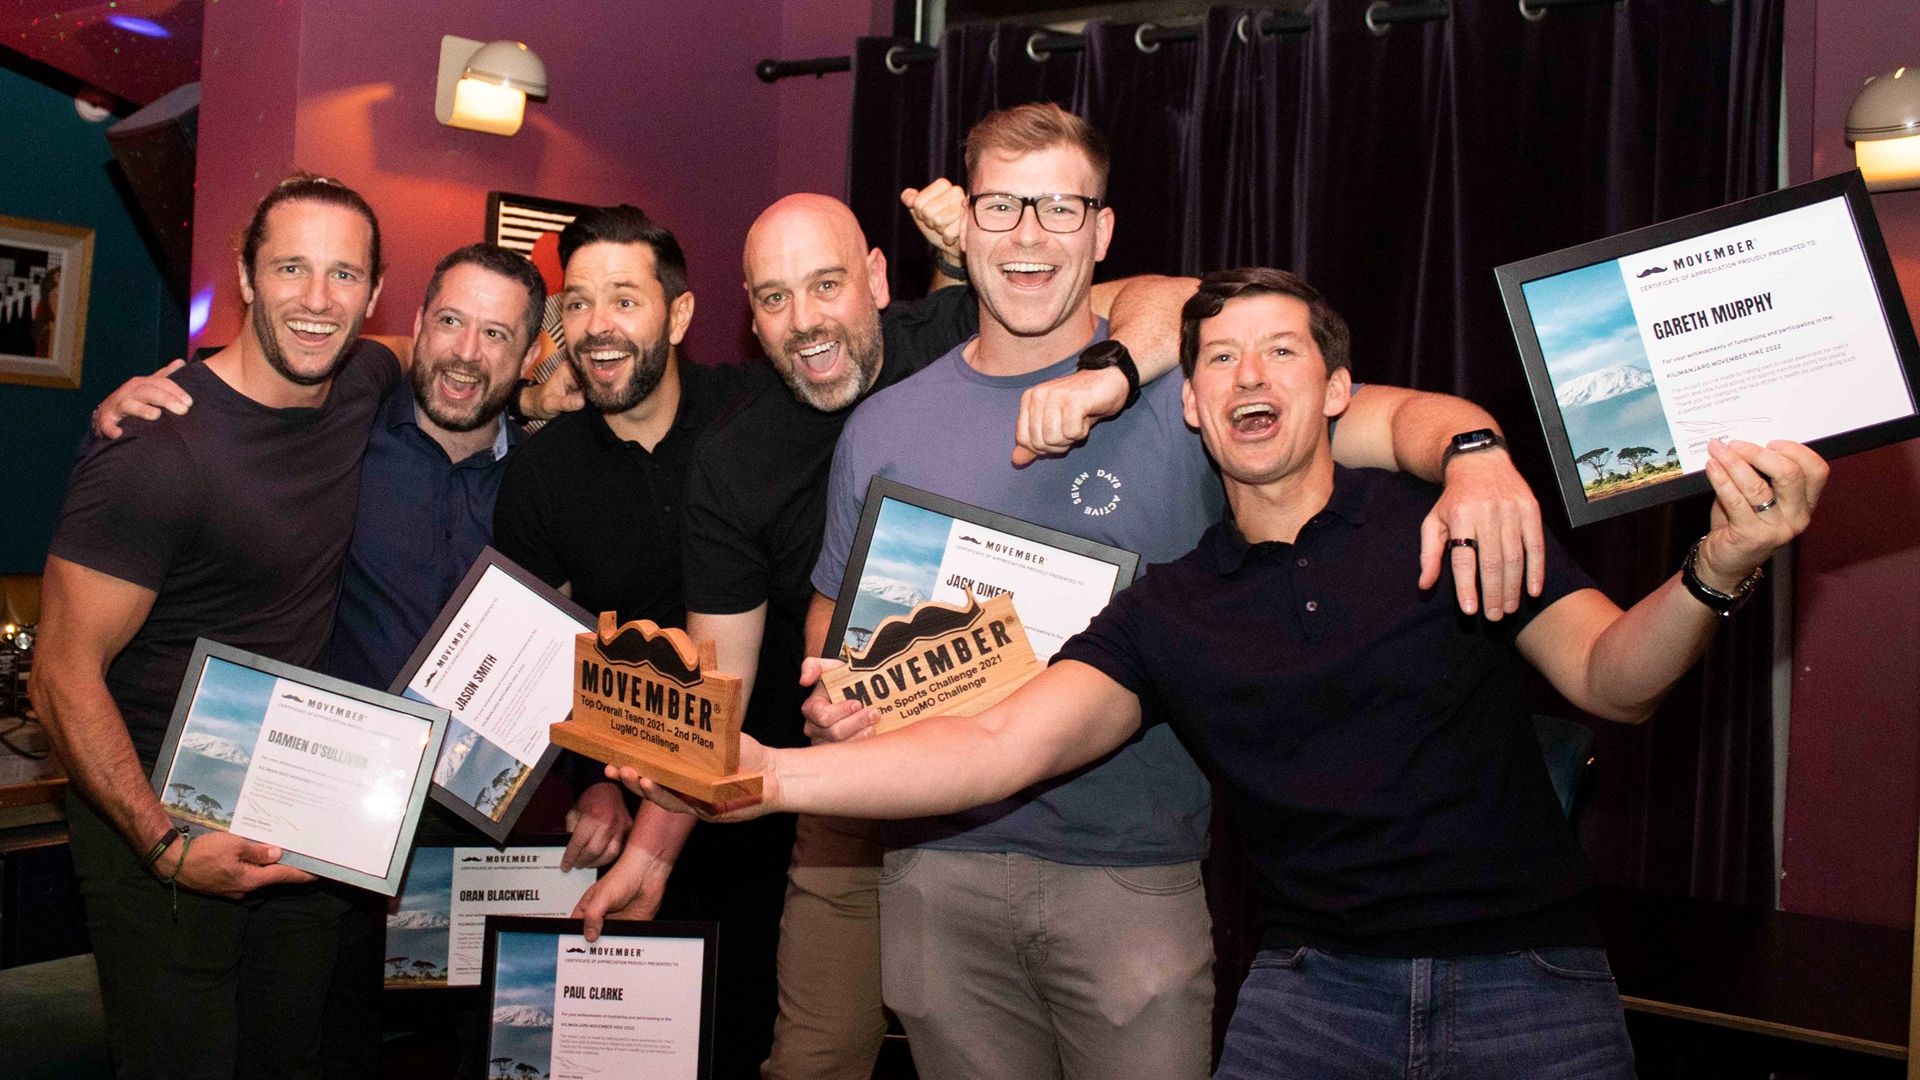 A photo of a group of Movember ambassadors with certificates and trophies.